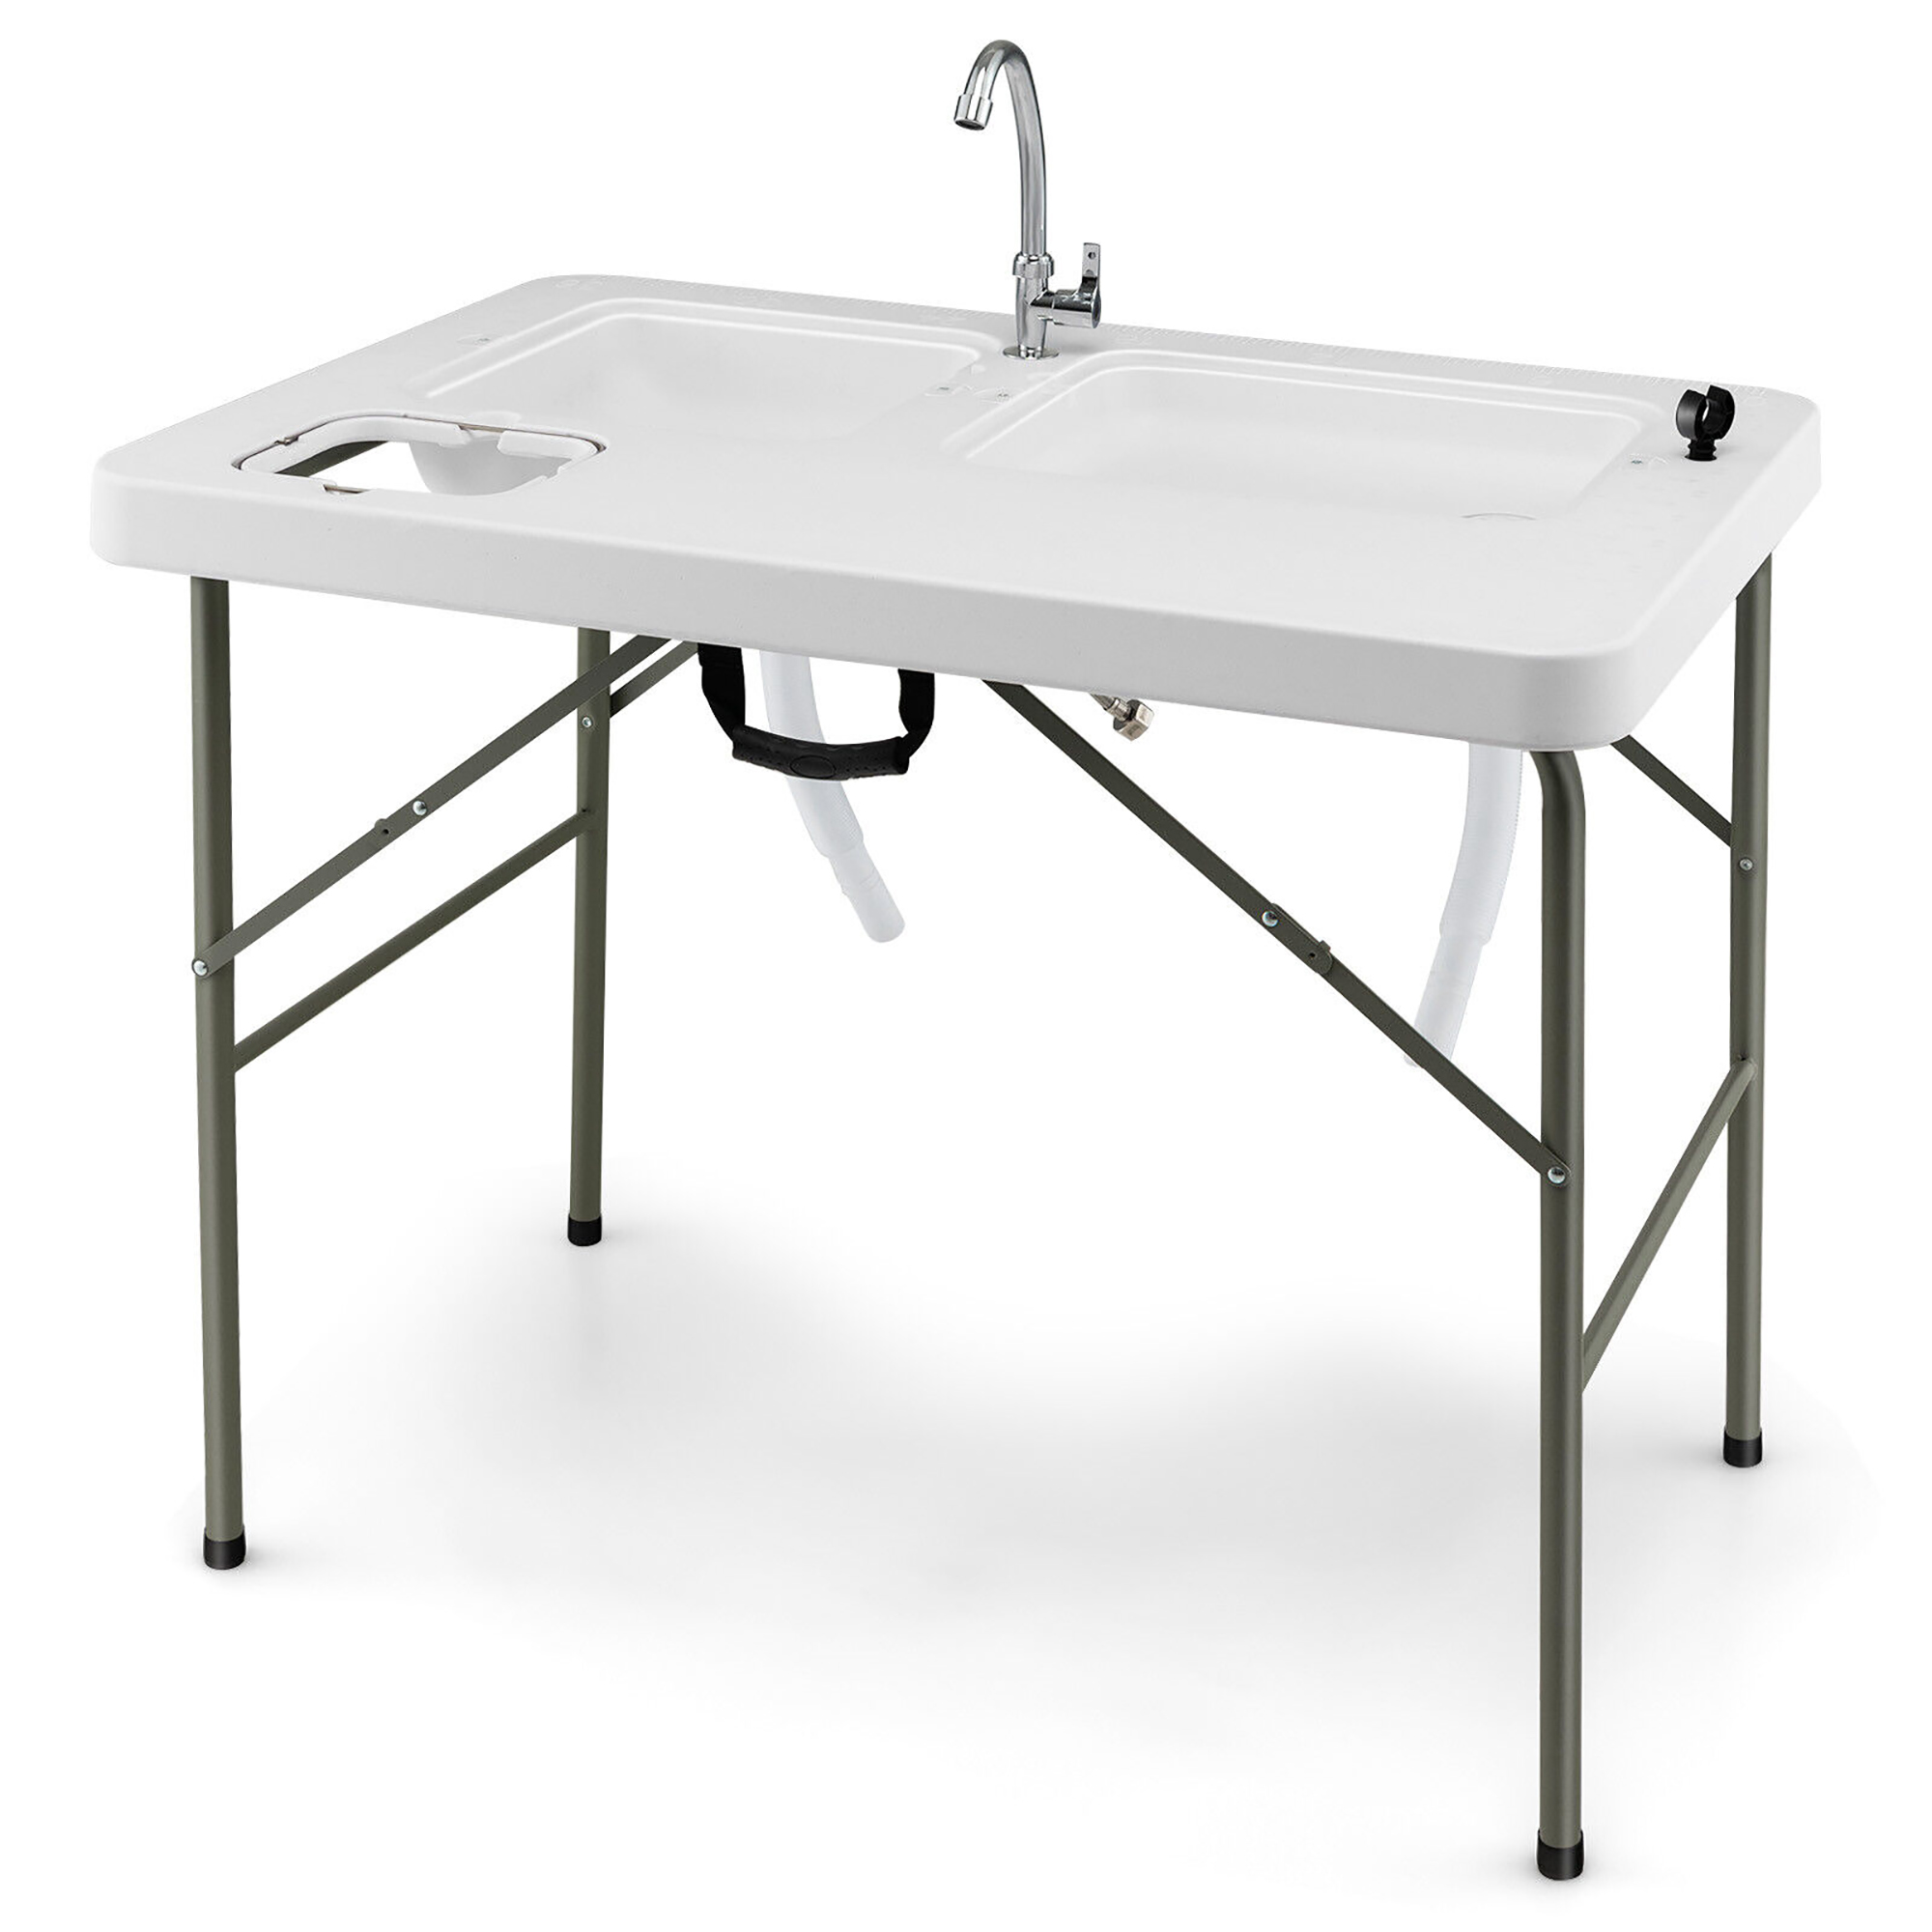 Gymax Folding Fish Cleaning Table w/ 2 Built-in Sinks & 360° Rotatable Faucet - image 1 of 9